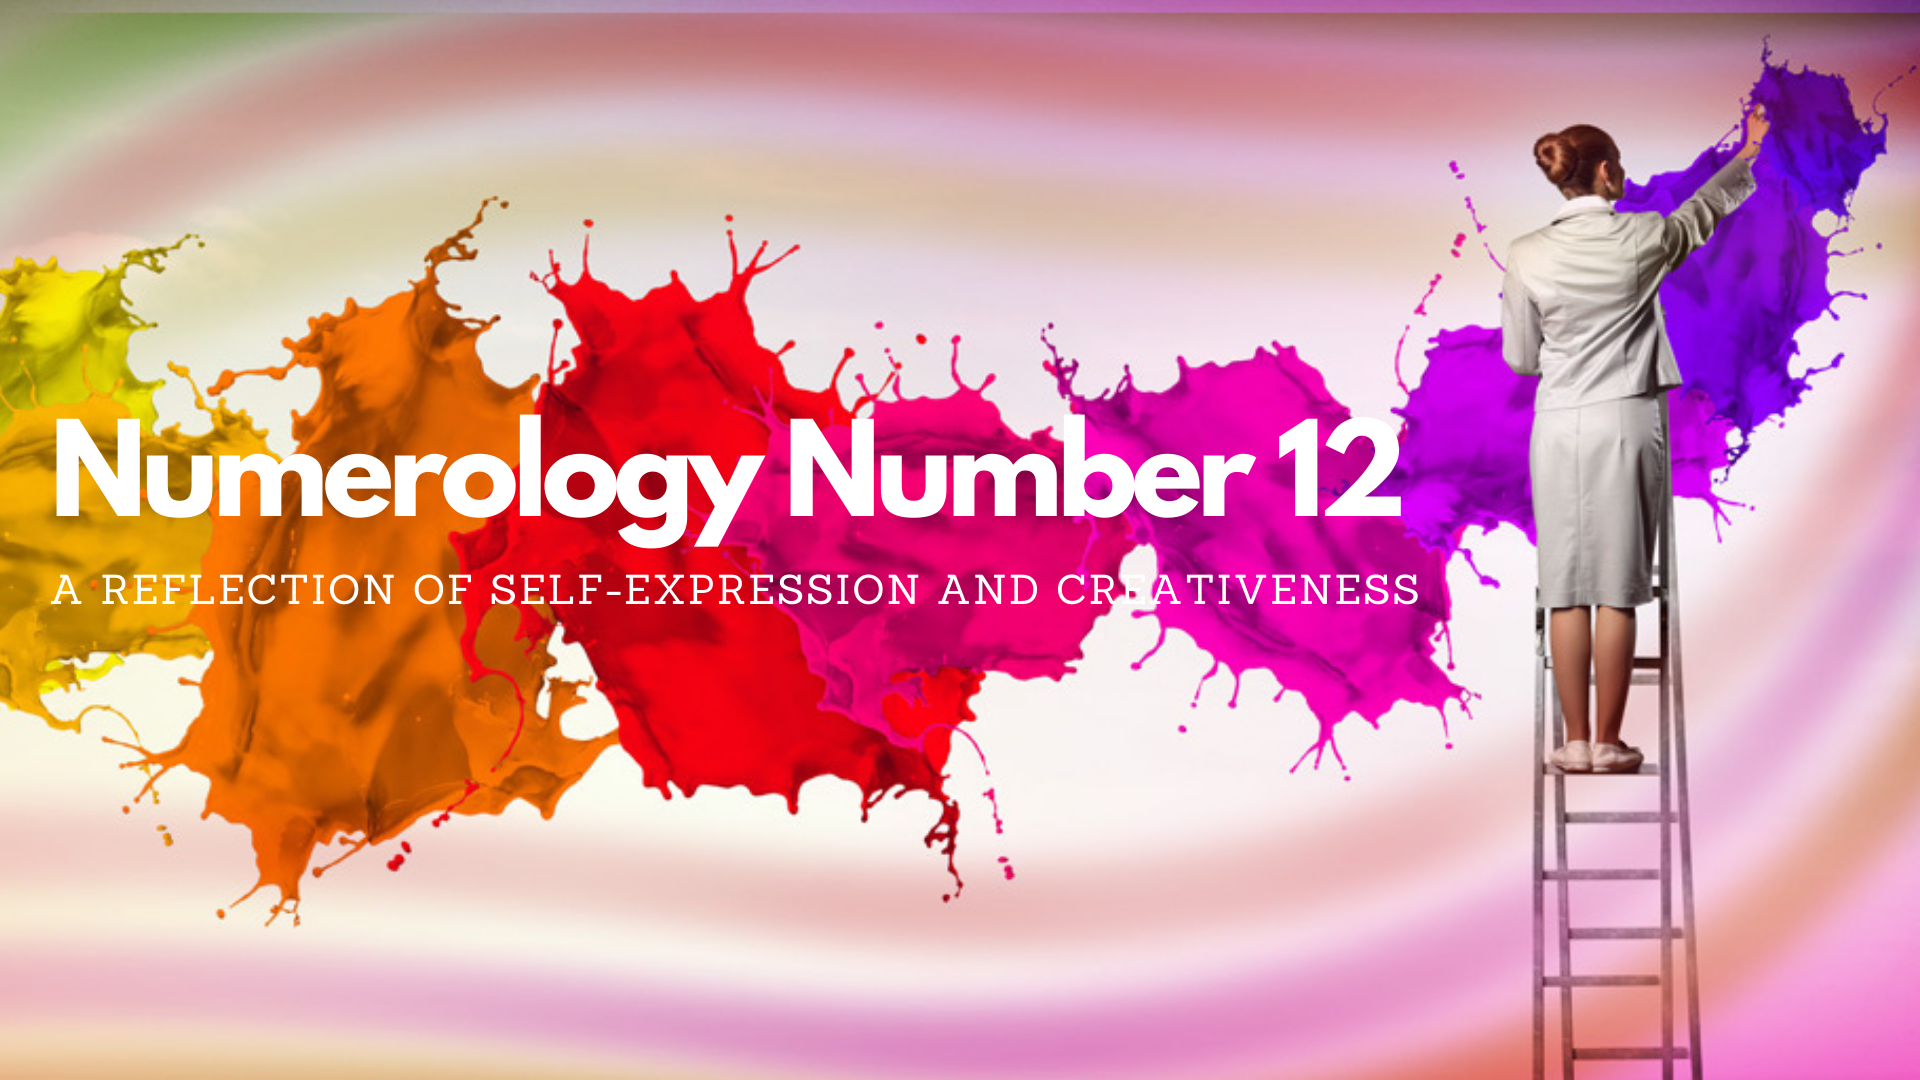 Numerology Number 12 - A Reflection Of Self-Expression And Creativeness